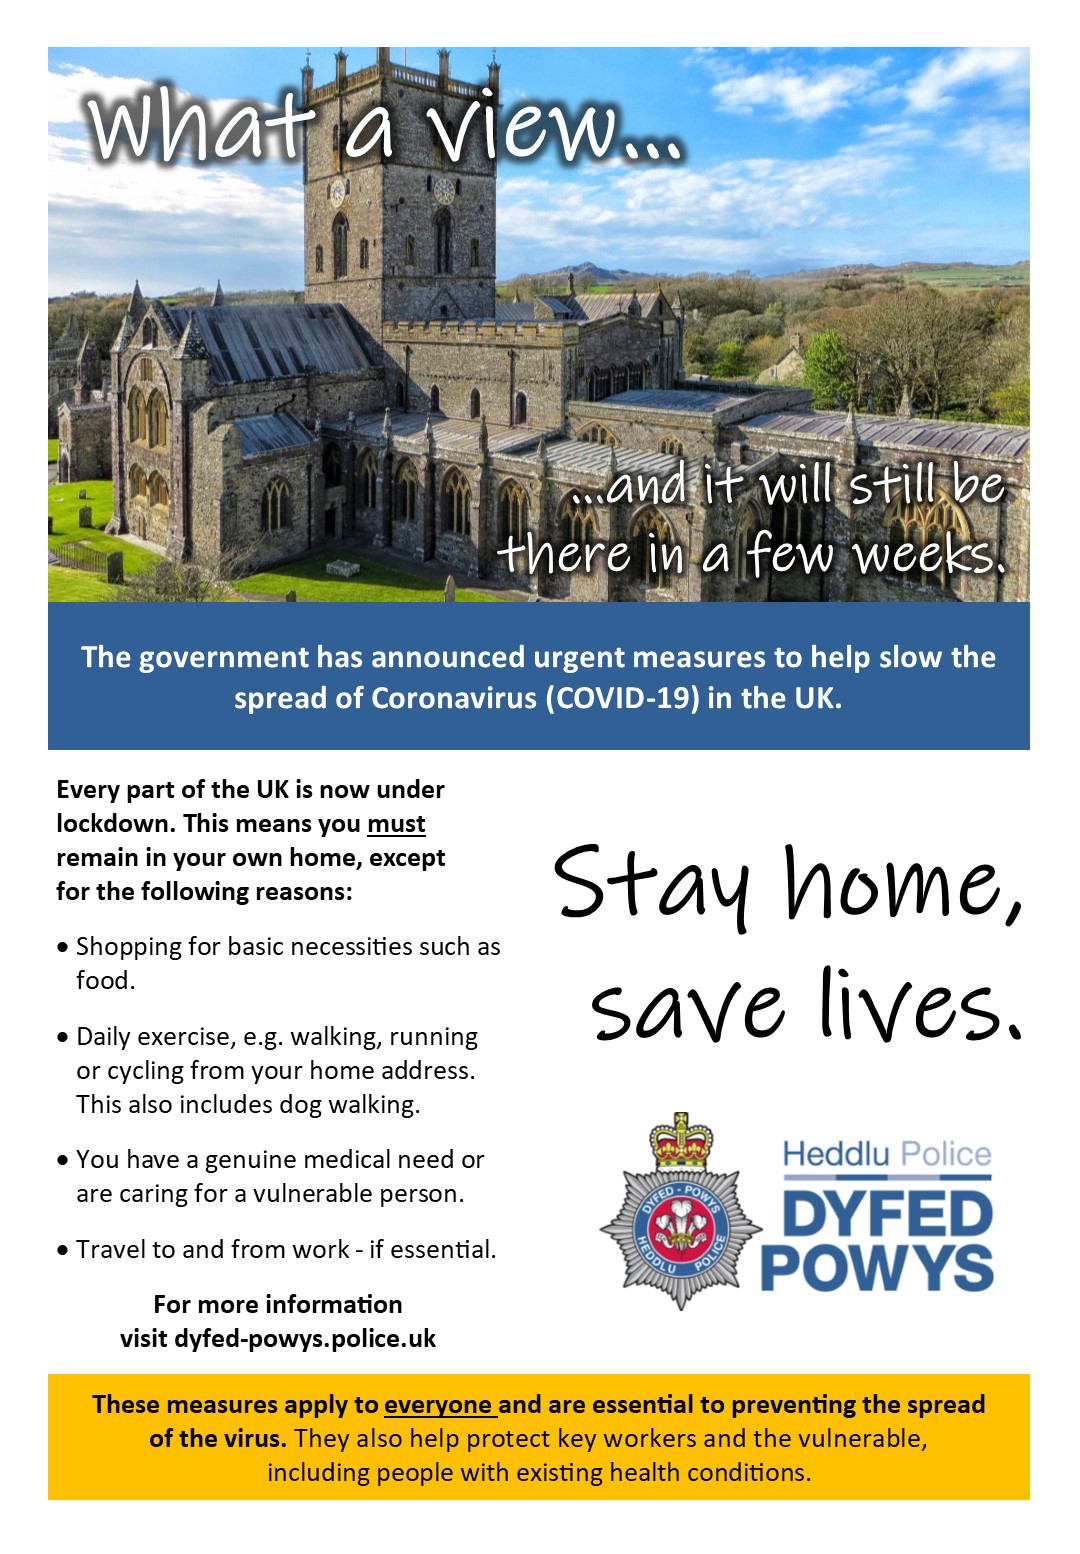 Police in Pembrokeshire are distributing flyers warning of the locksdown (Dyfed-Powys Police/PA)